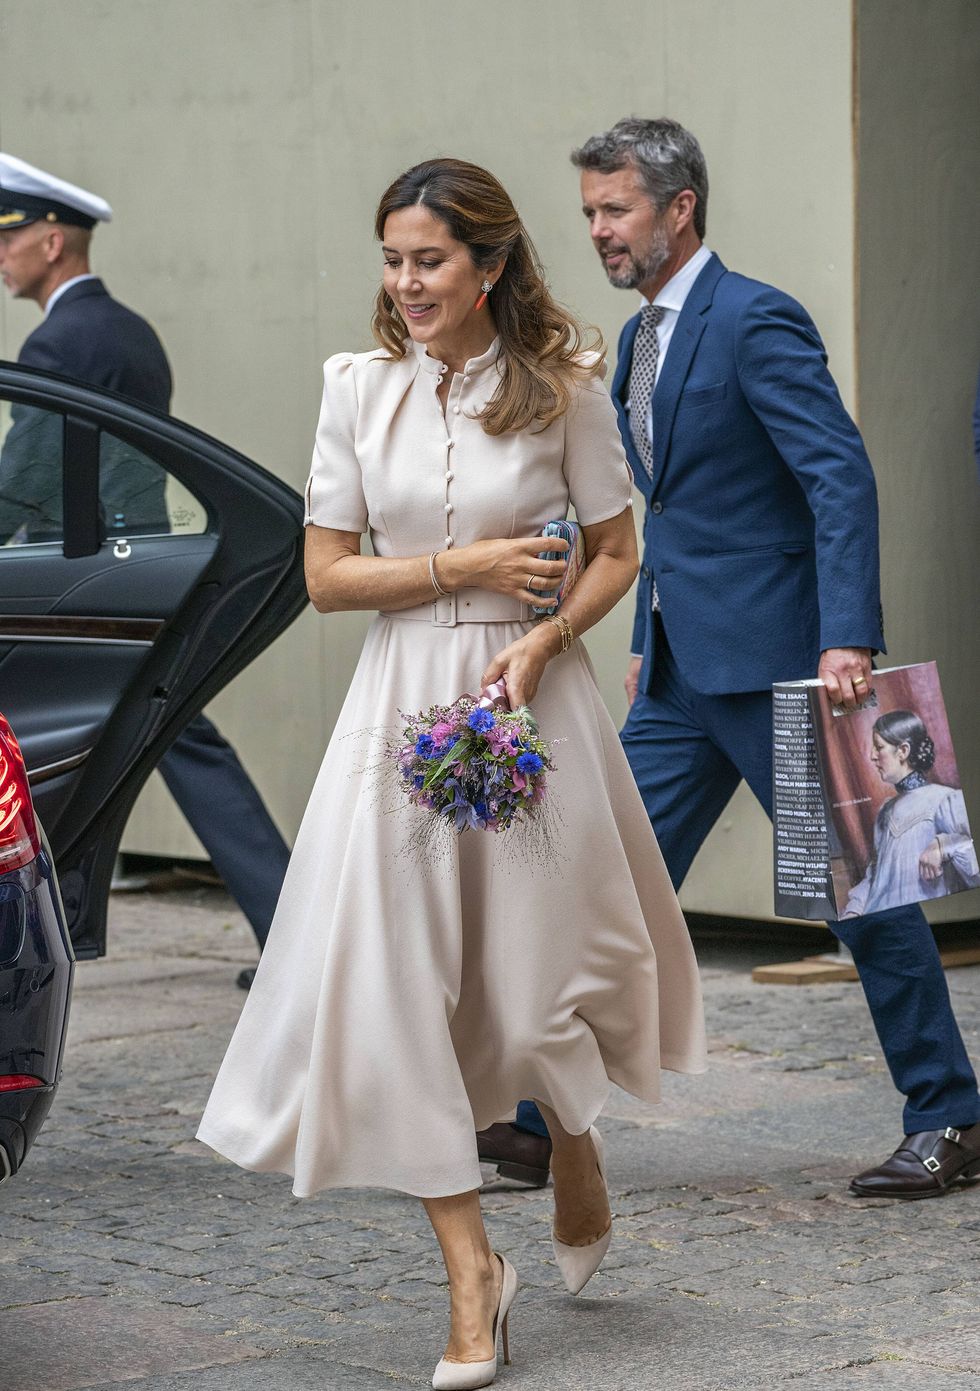 queen margrethe, crown prince frederik and crown princess mary attend the exhibition “the faces of the queen” at frederiksborg castle museum of national history hilleroed, june 16, 2020 photo kaspar wenstrup aller foto video 16 jun 2020 pictured crown princess mary, crown prince frederik photo credit kaspar wenstrupallermega themegaagencycom 1 888 505 6342